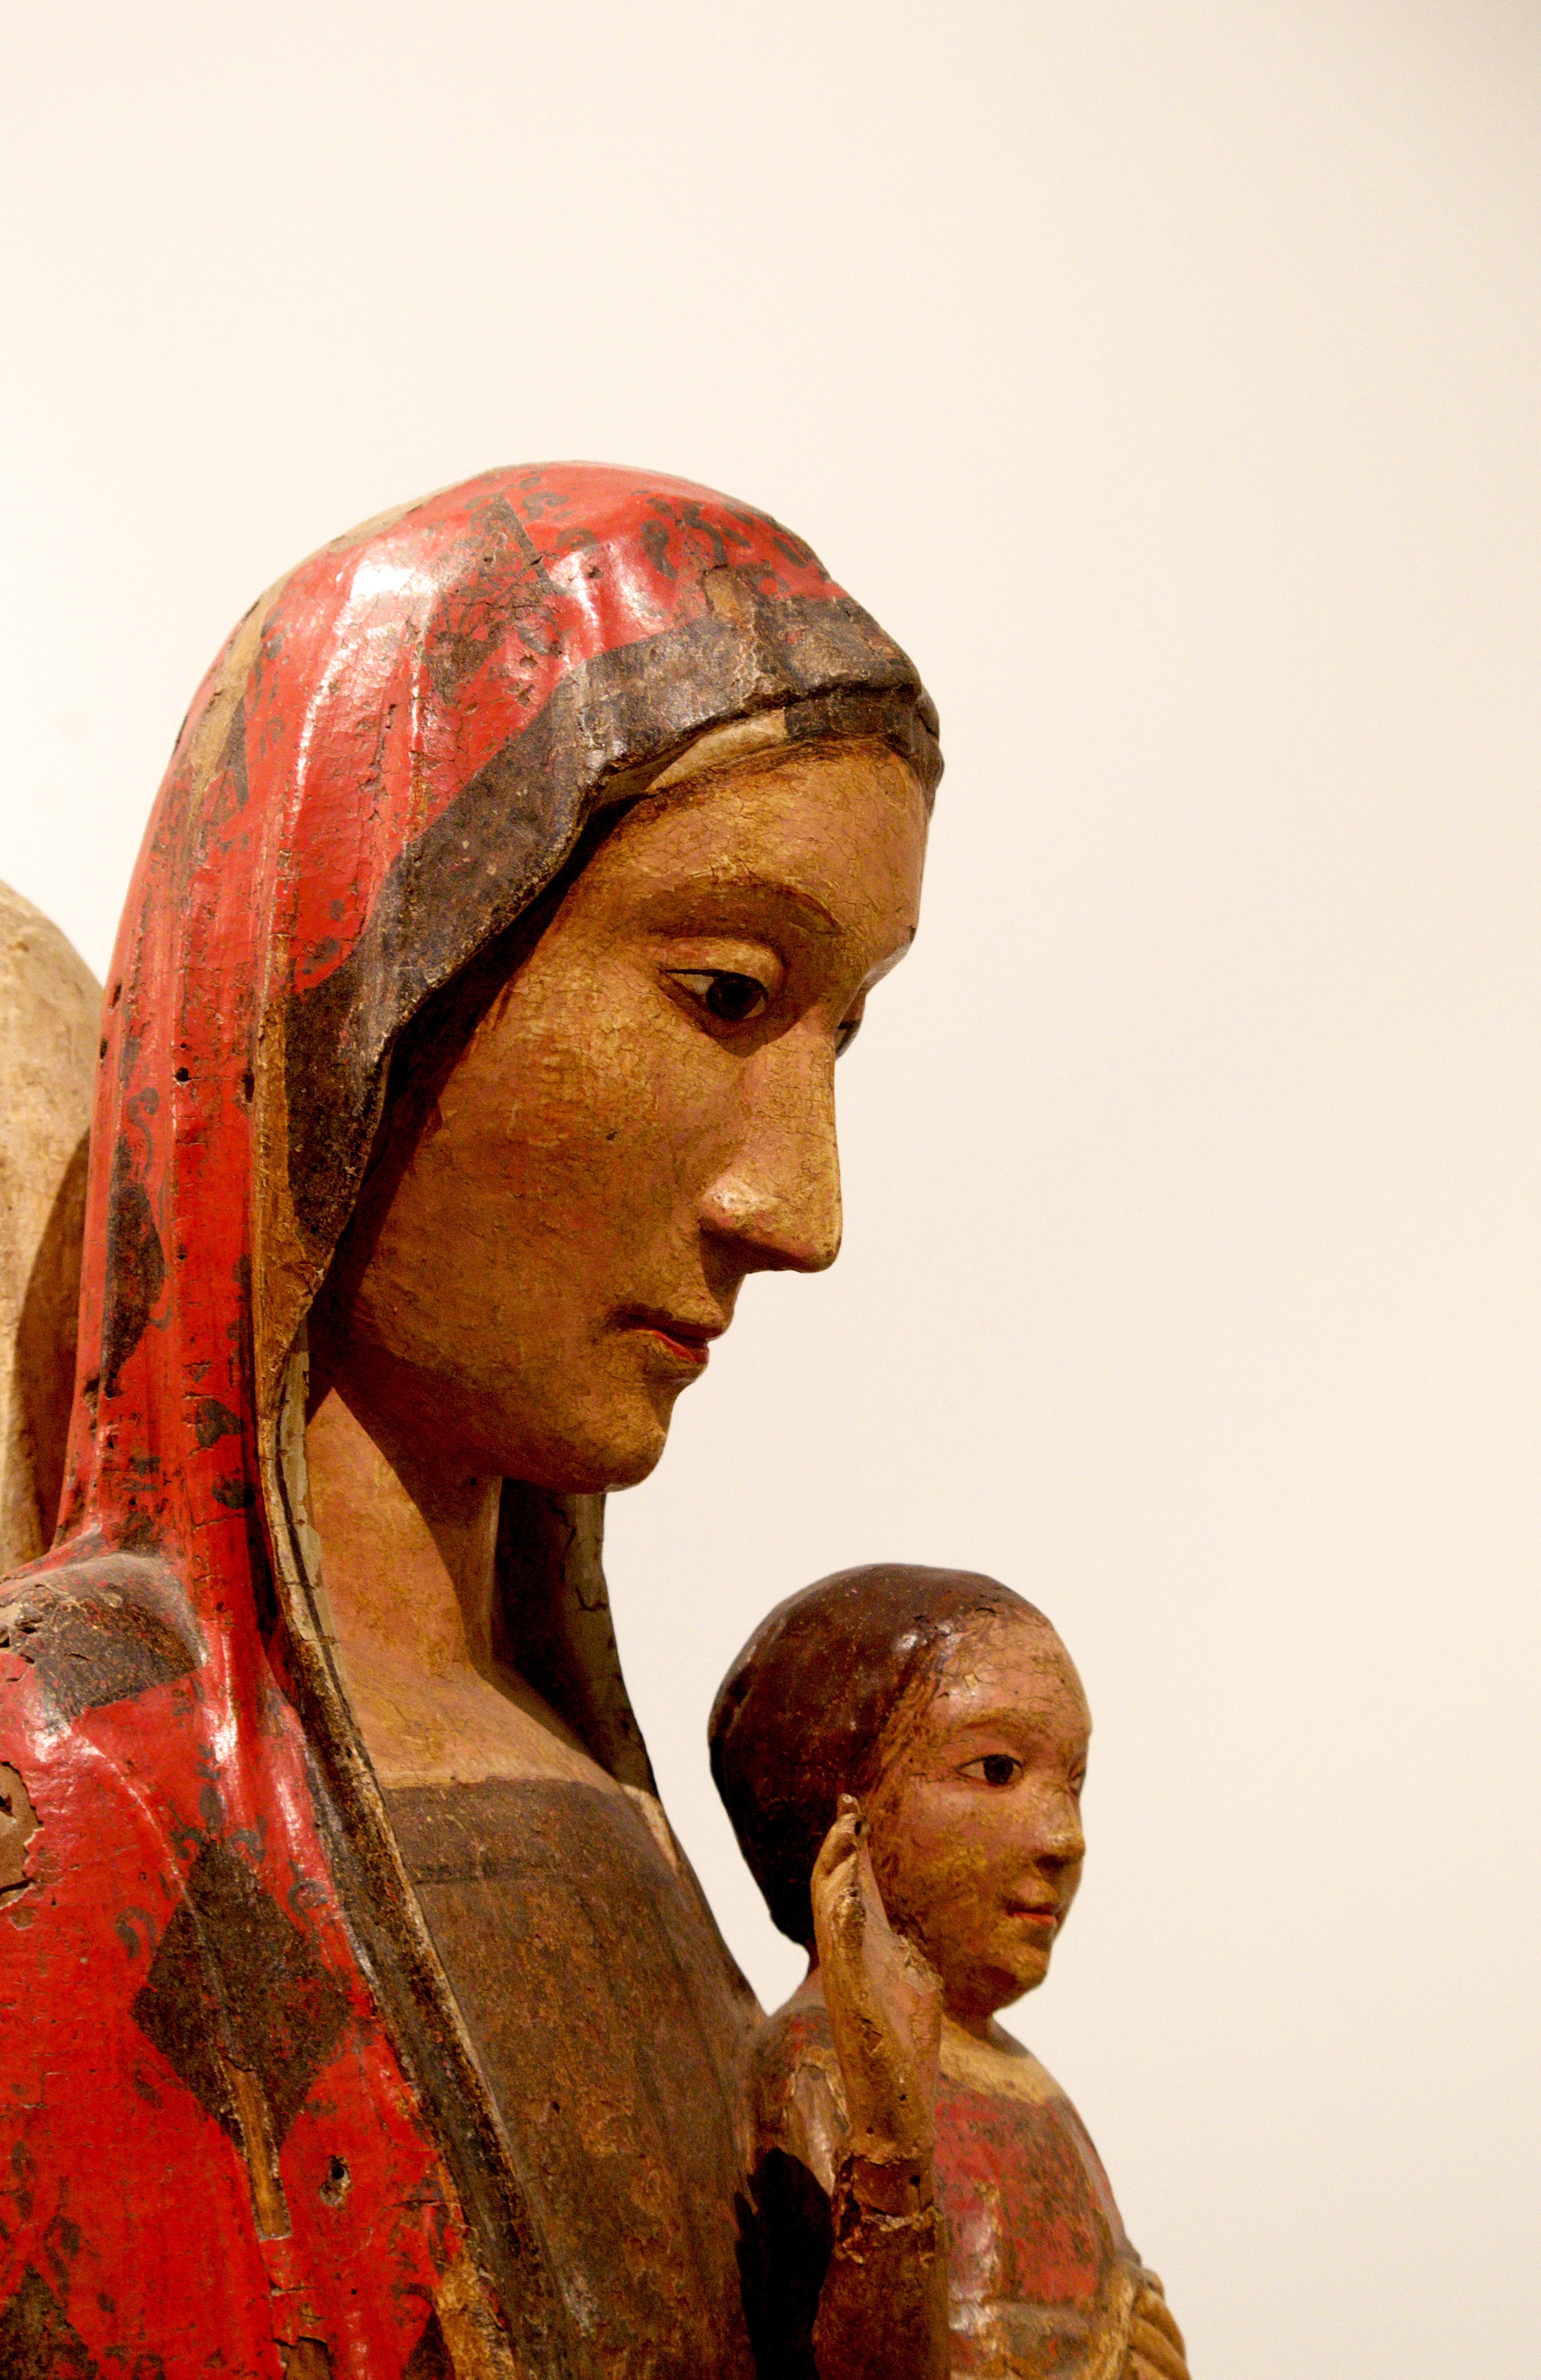 female carrying child figurine